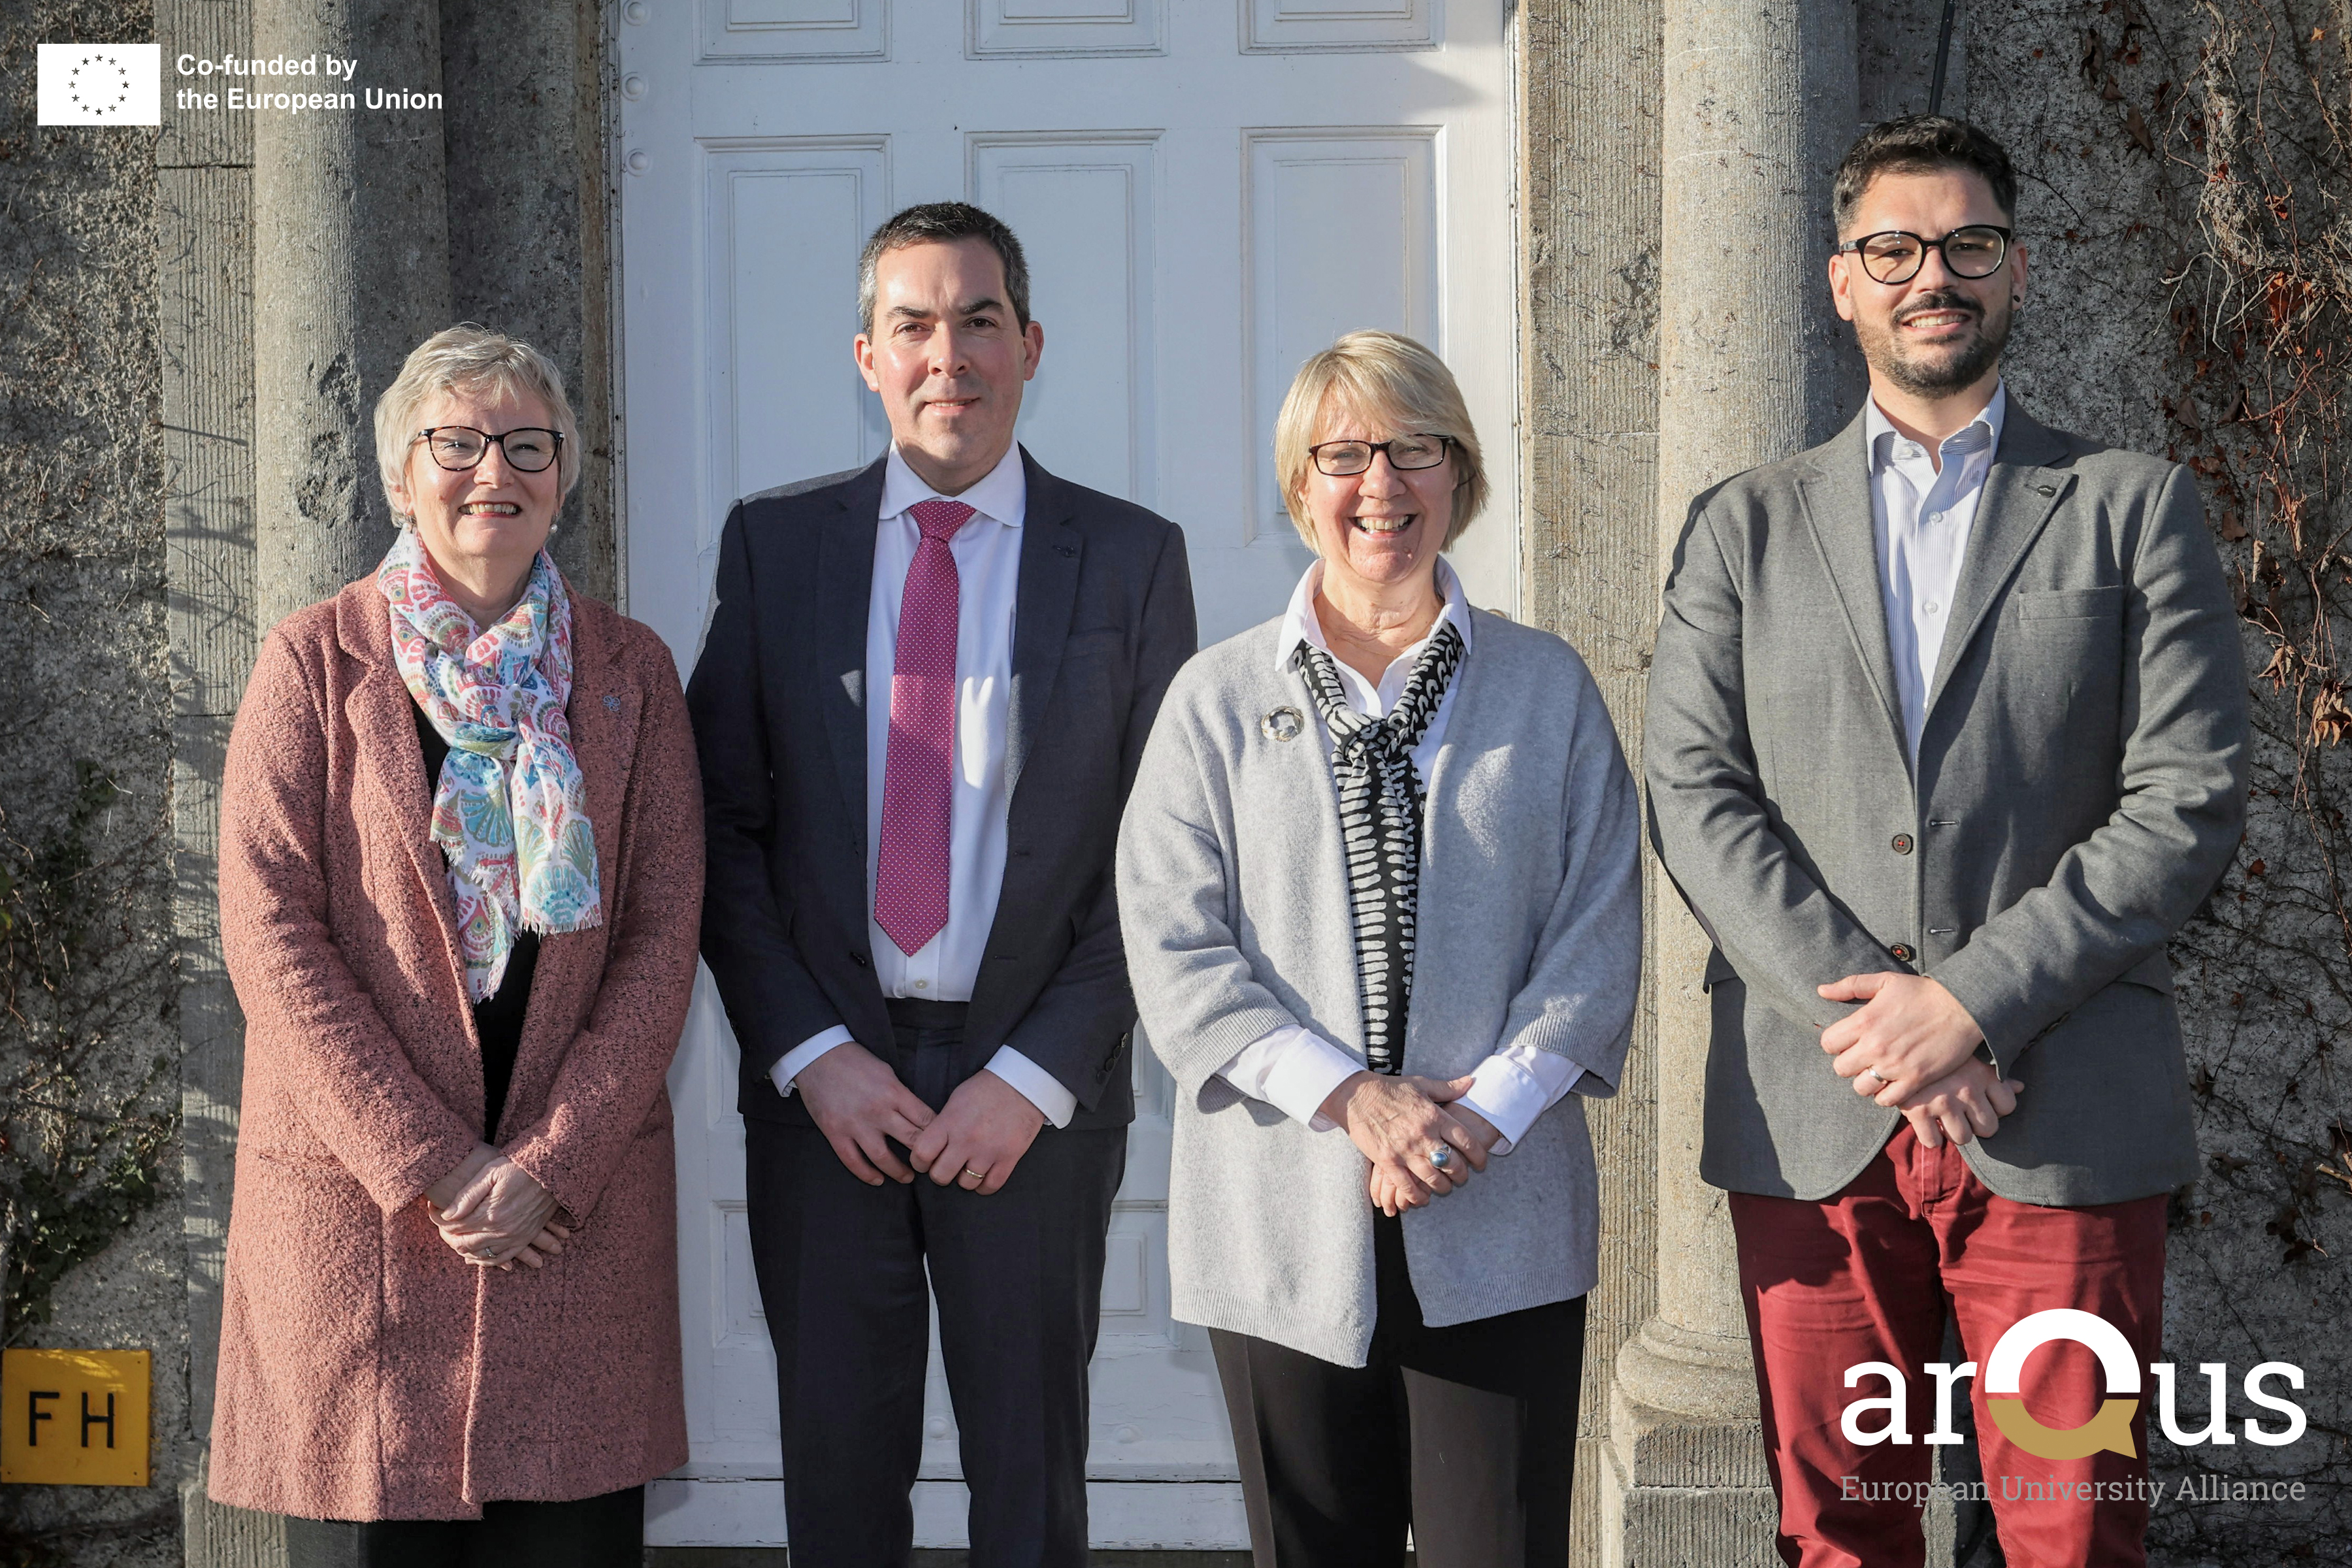 from left to right: Professor Dorothy Kelly (Coordinator of the Arqus Alliance and Vice-Rector for Internationalization at the University of Granada), Professor Patrick McCole (Vice-President International at Maynooth University), Professor Eeva Leinonen (President of Maynooth University), Fernando Galán (Arqus Executive Manager).